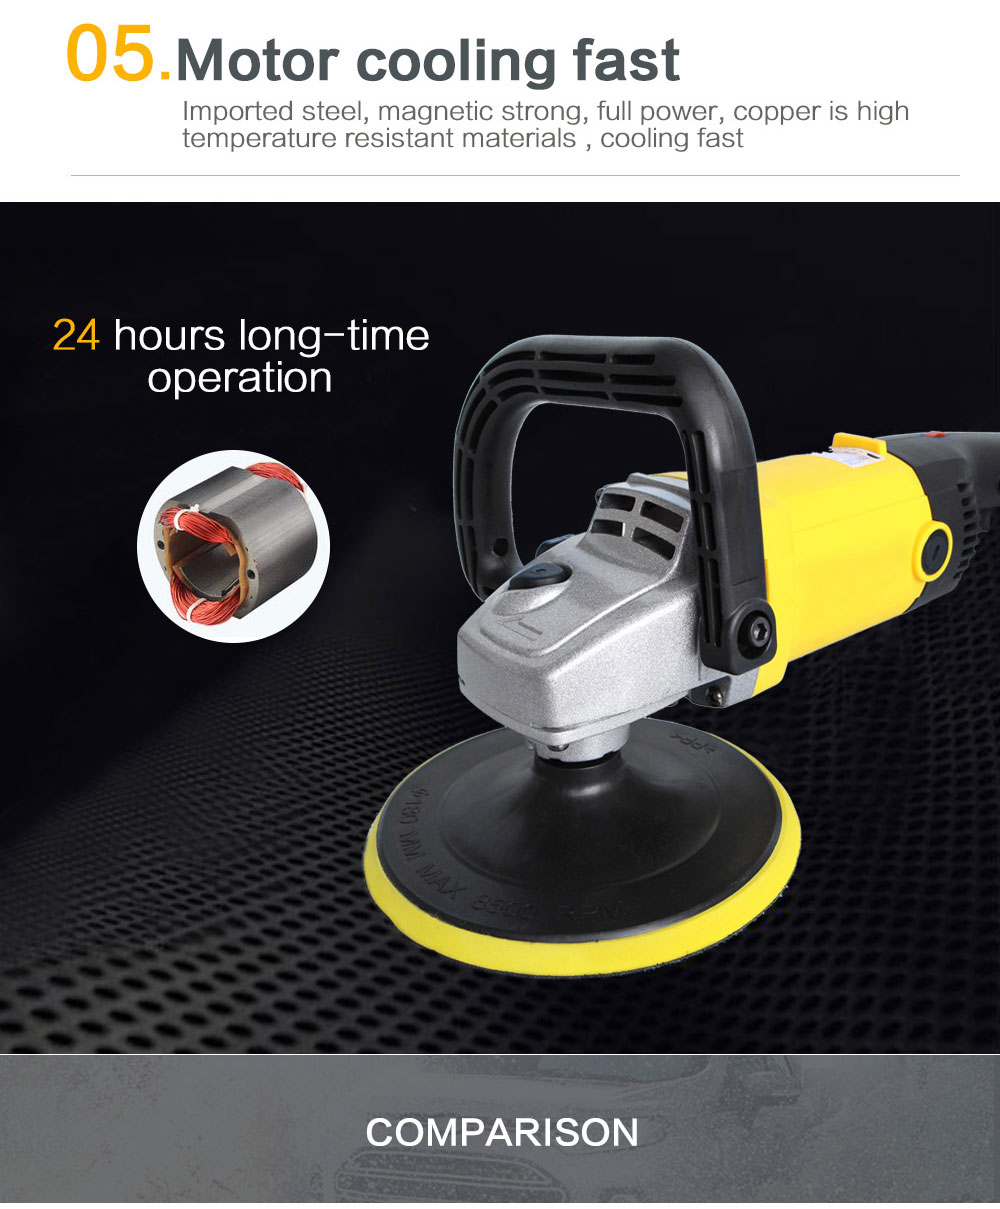 Universal Electric Car Polisher and Buffing Machine